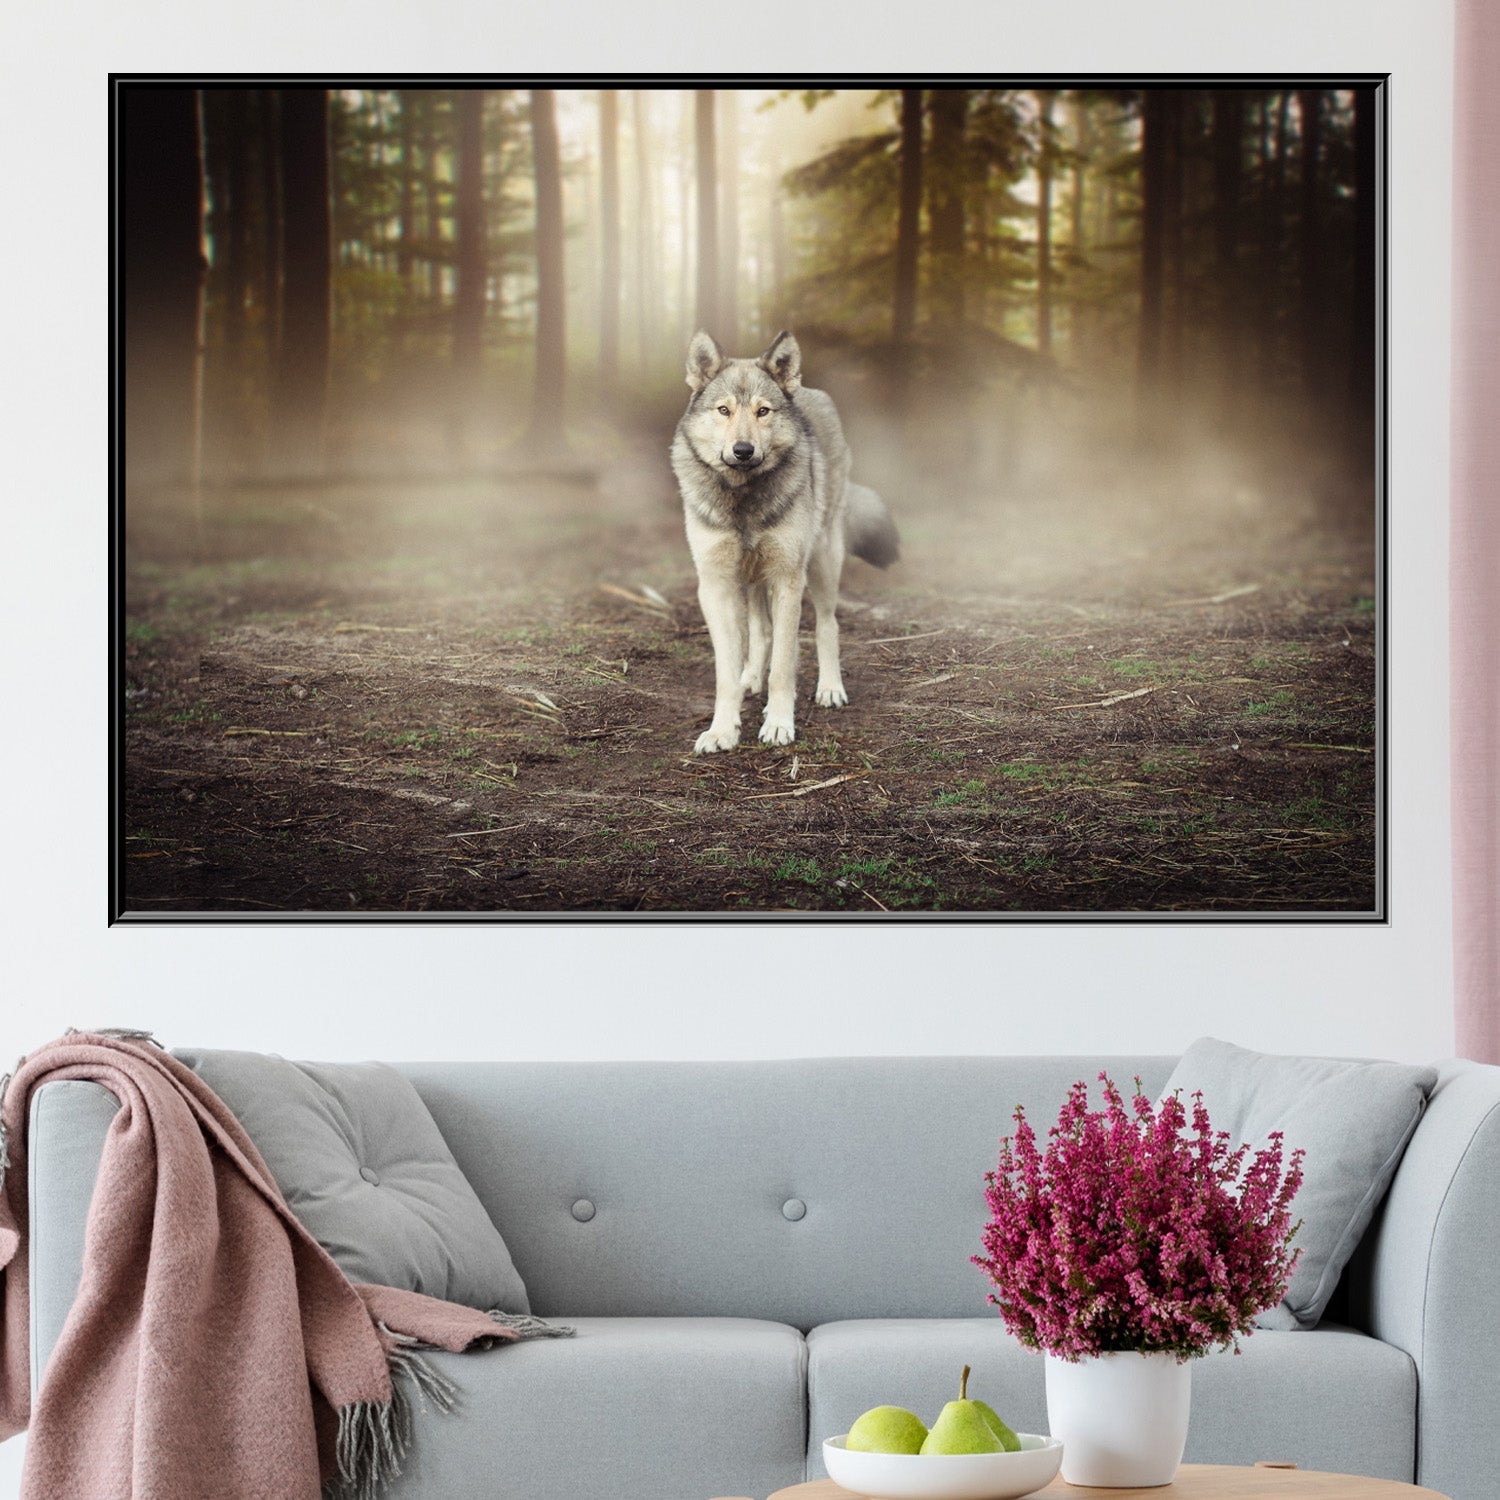 https://cdn.shopify.com/s/files/1/0387/9986/8044/products/ForestWolfCanvasArtprintStretched-1.jpg